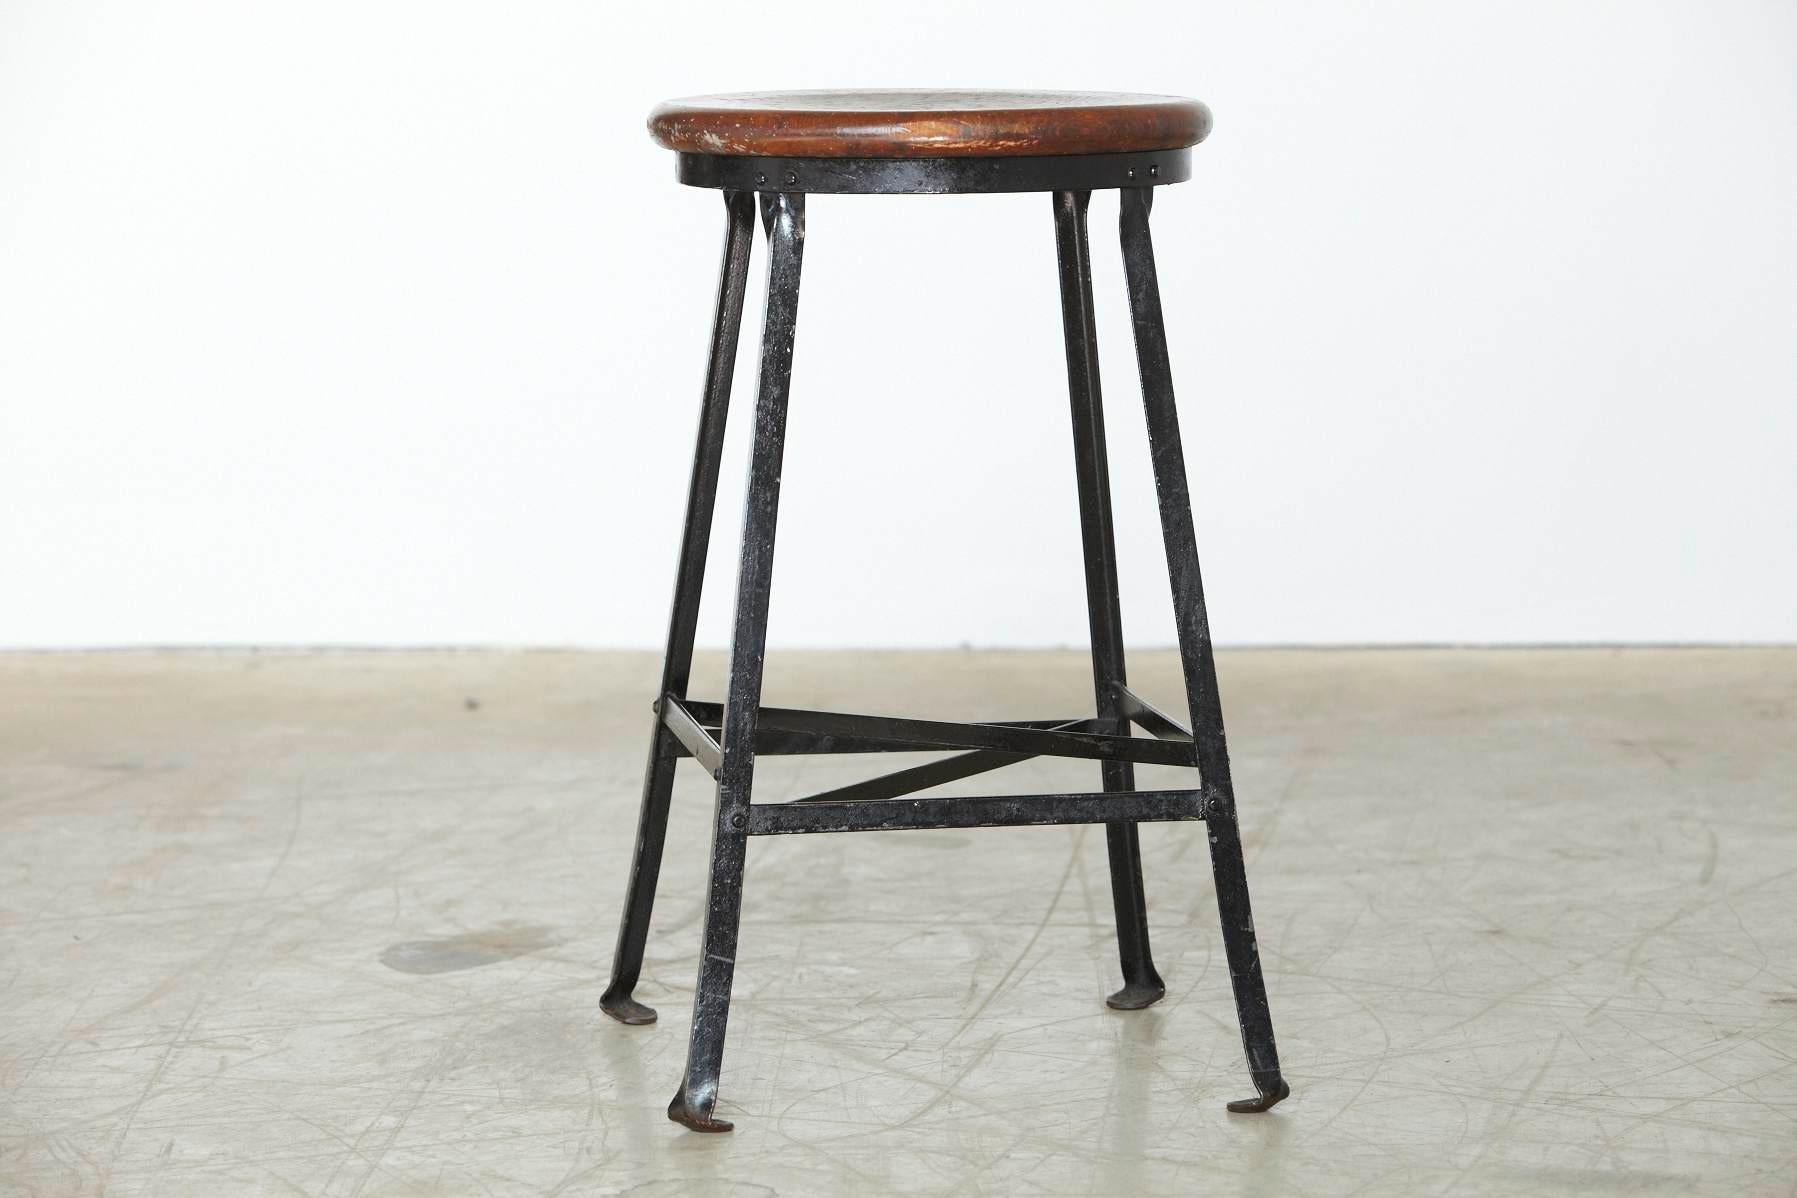 American Vintage Industrial Stool with Steel Frame and Oak Seat, circa 1940s